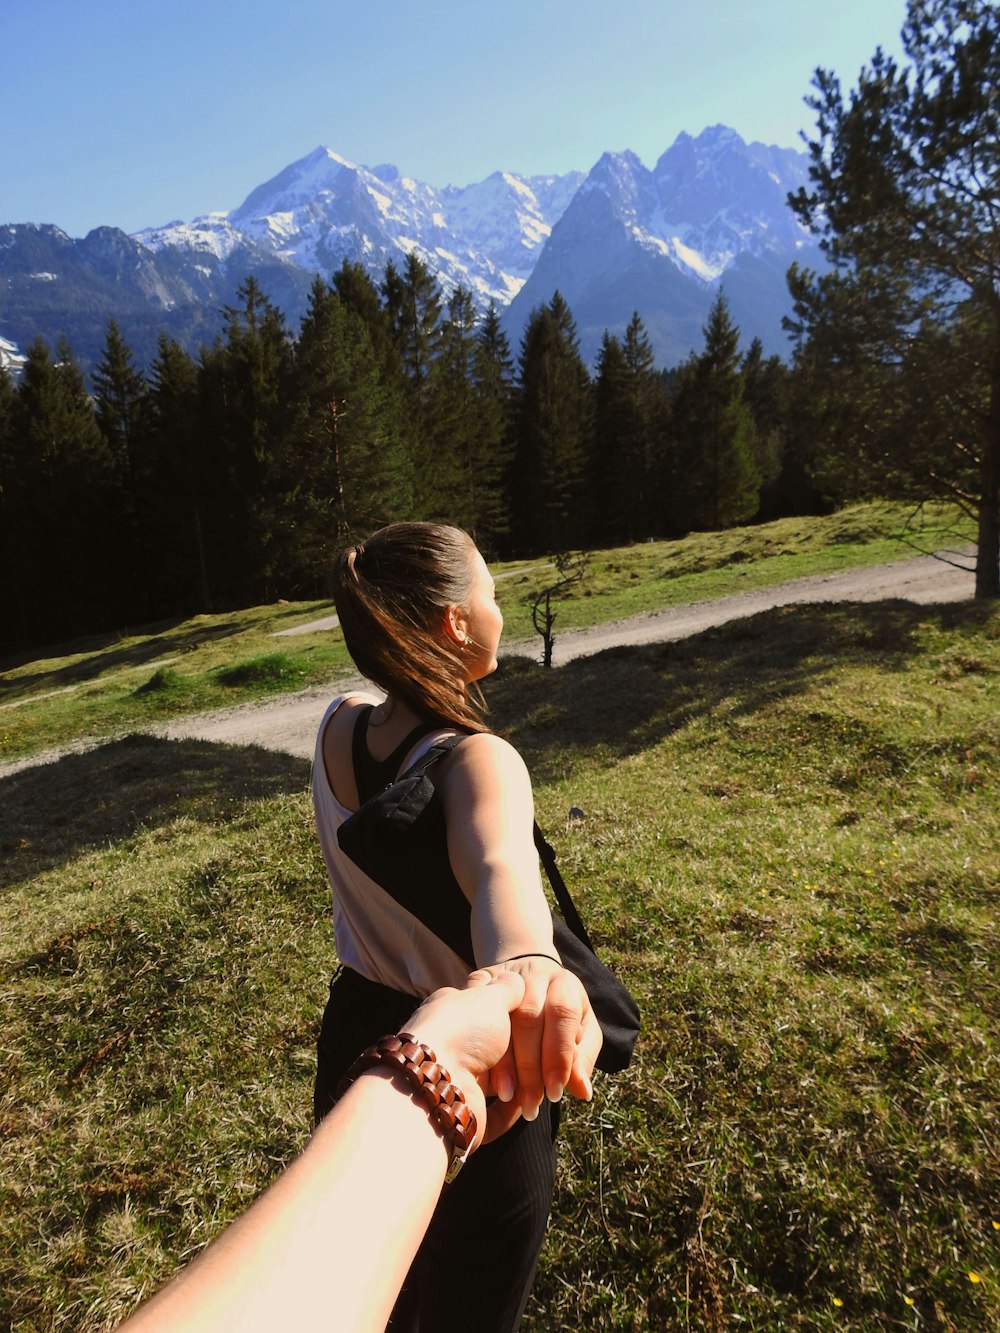 person holding woman hand standing near pine trees and mountain during daytime